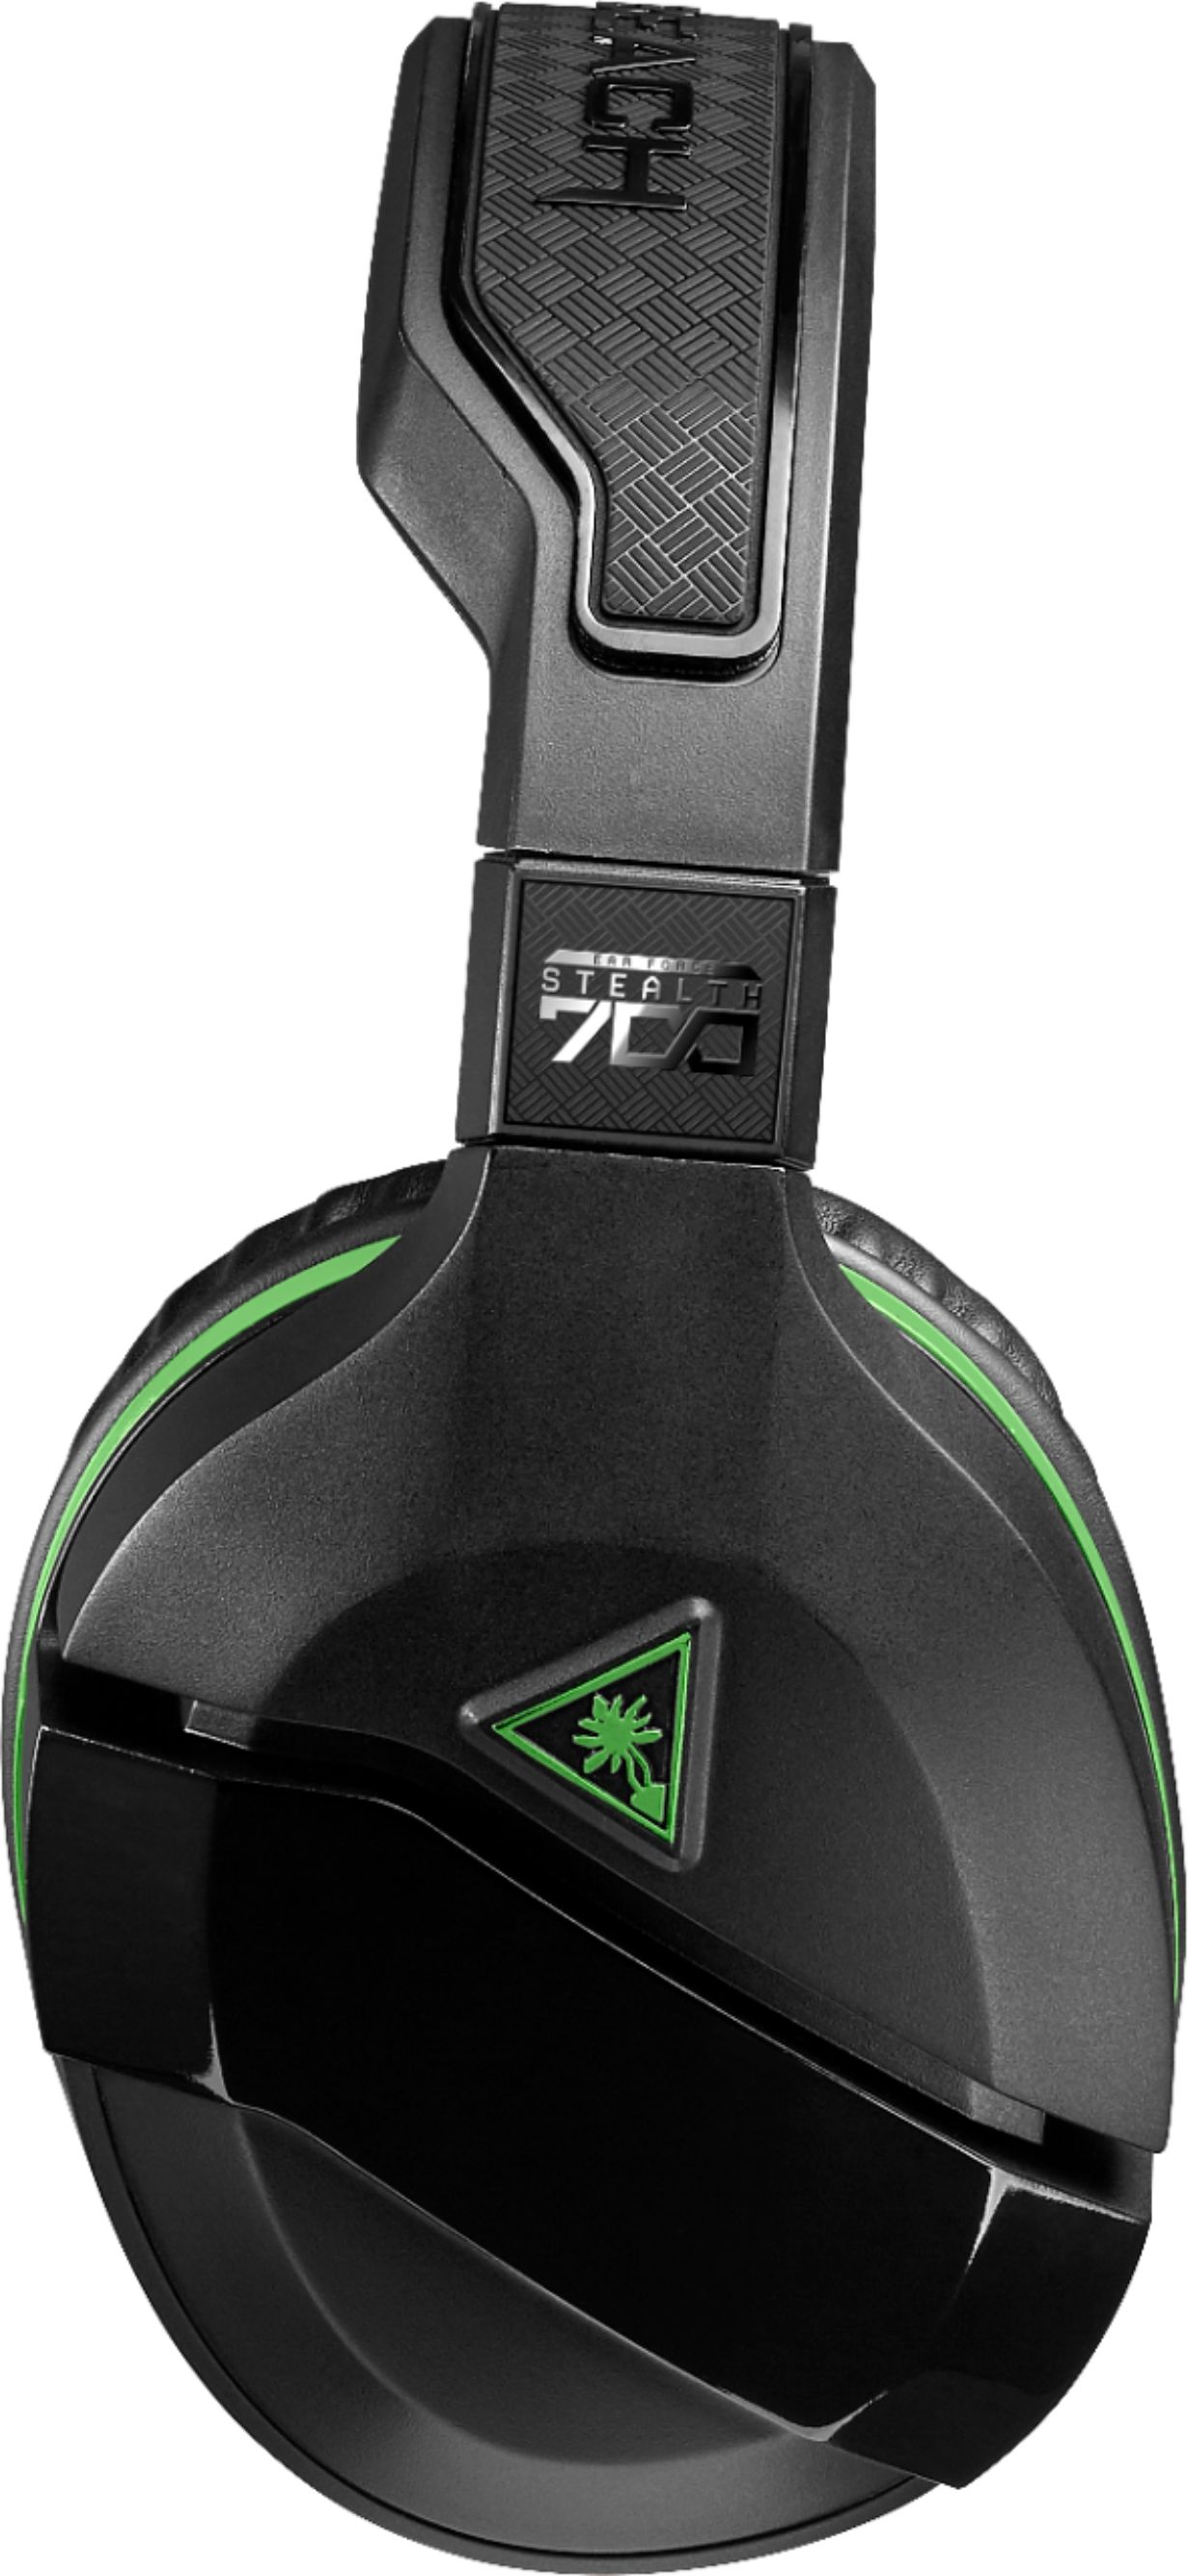 stealth 700 xbox headset